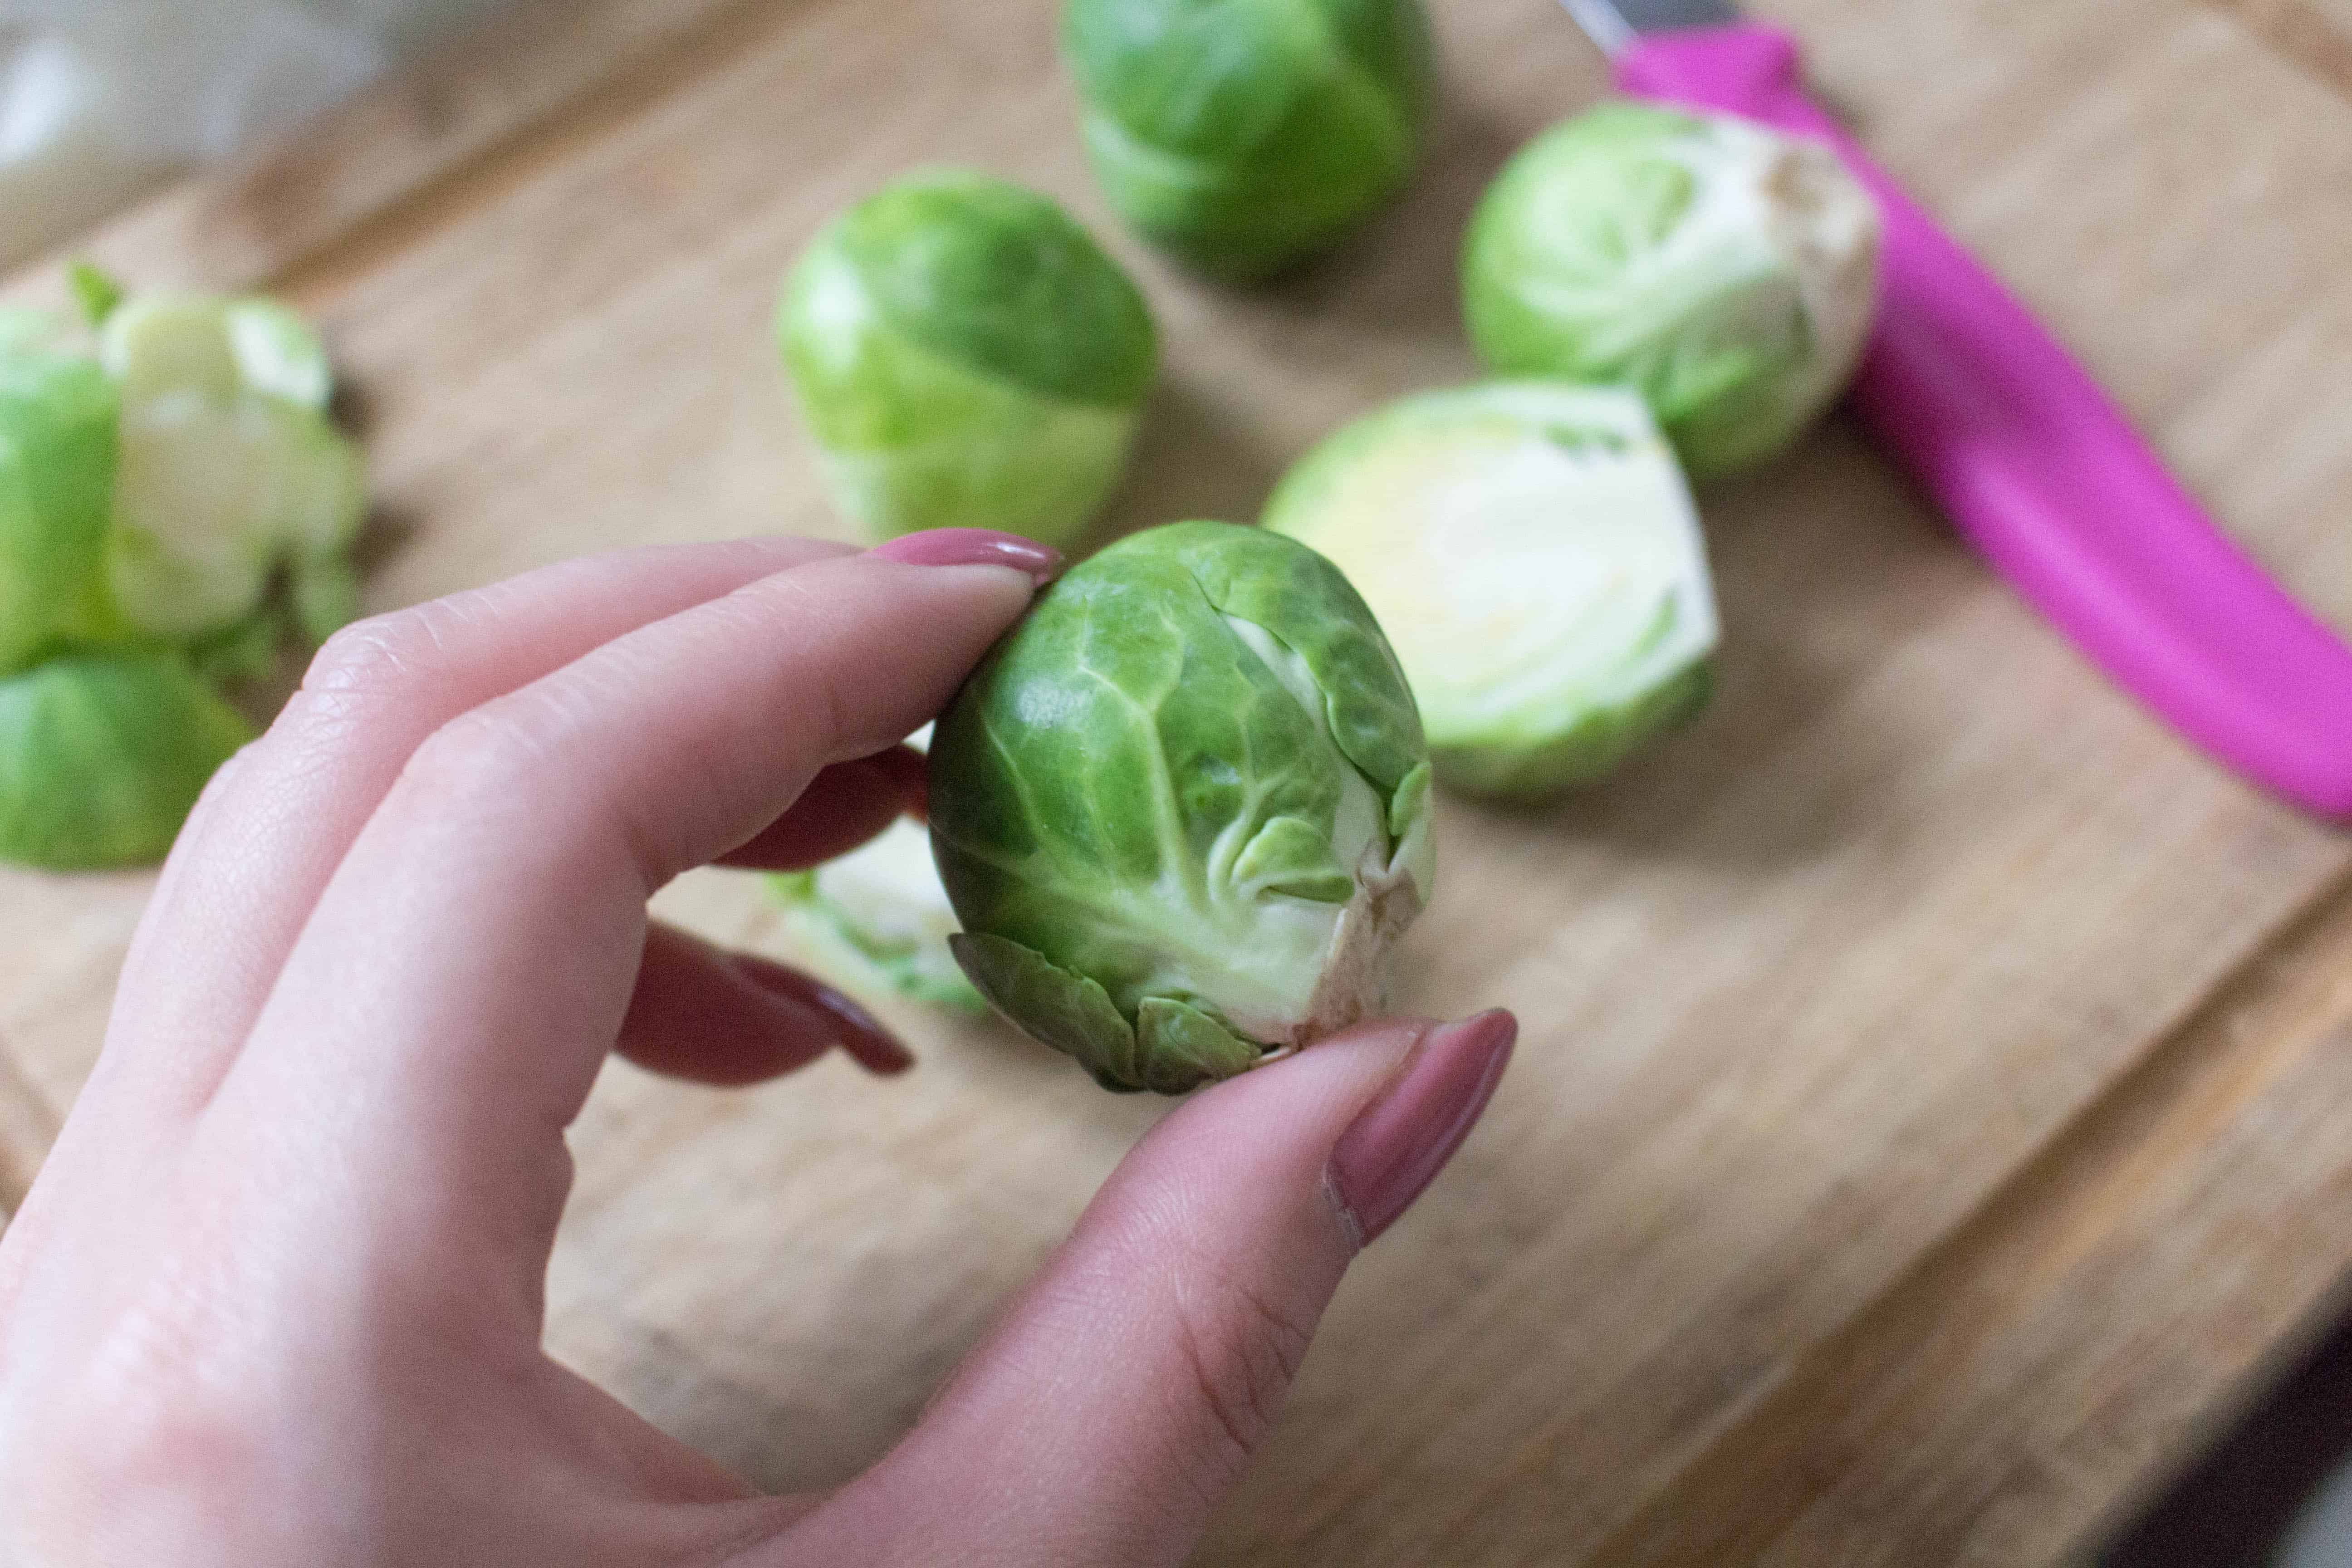 What Are Brussels Sprouts? Brussels sprouts or brussel sprouts?